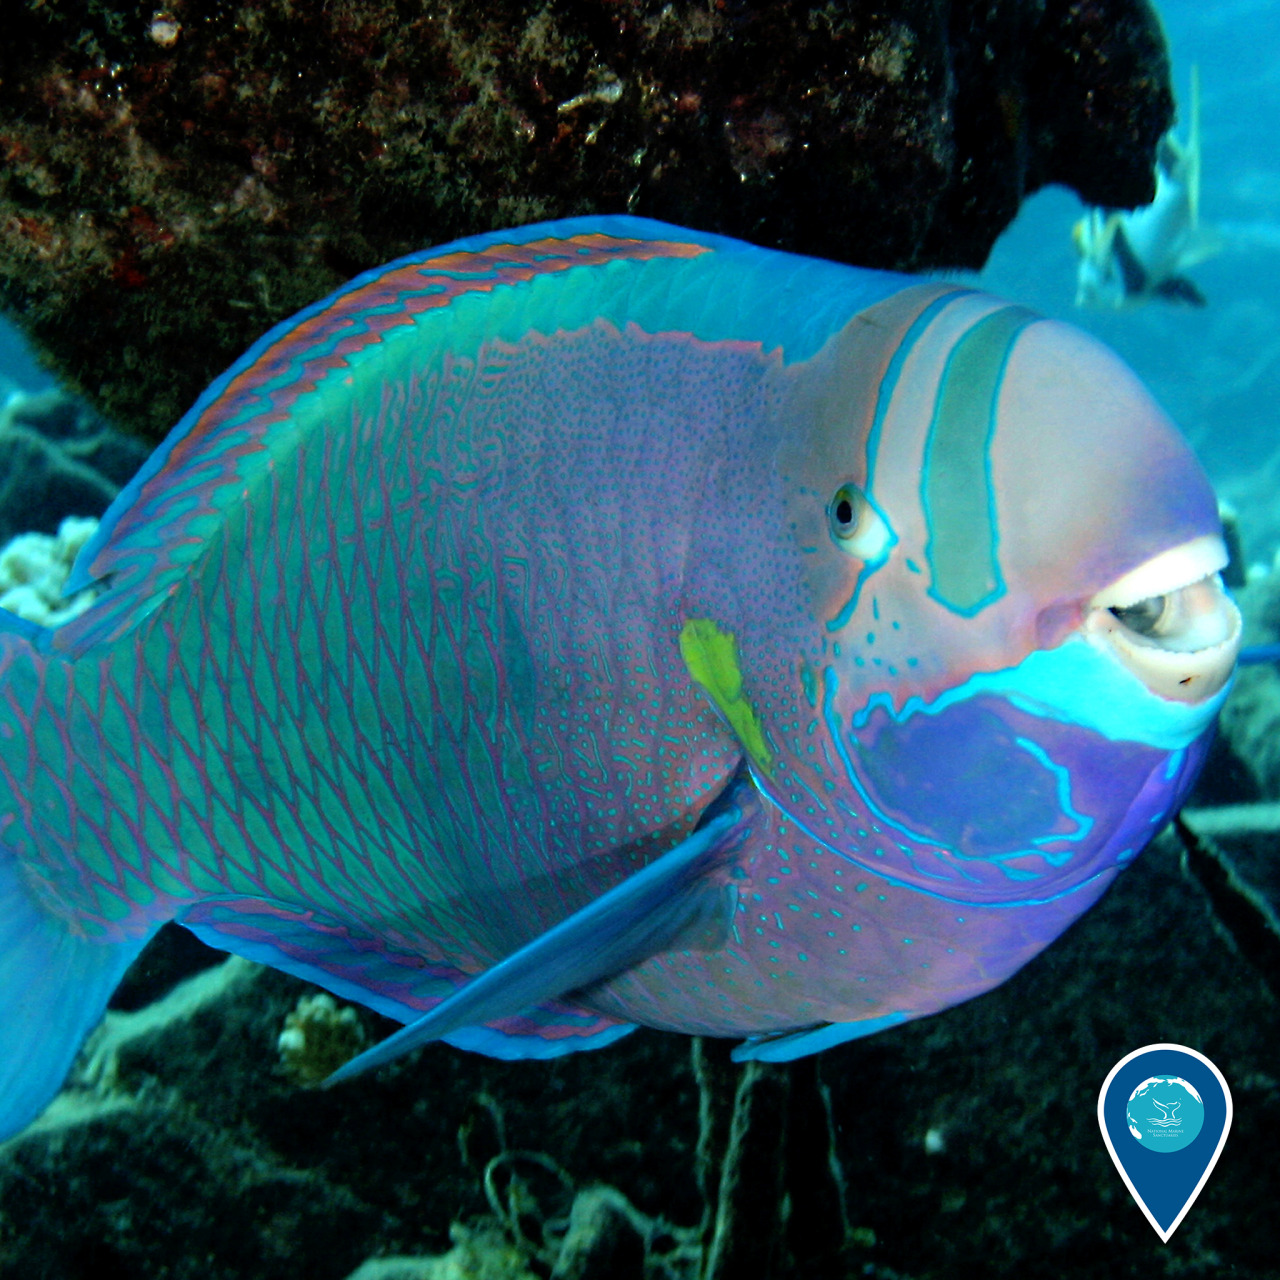 Much like the ever-unique and zany Christmas sweaters we love to don this season, coloration patterns on parrotfish vary dramatically – even among members of the same species! This variation in color and pattern has made them difficult for scientists...